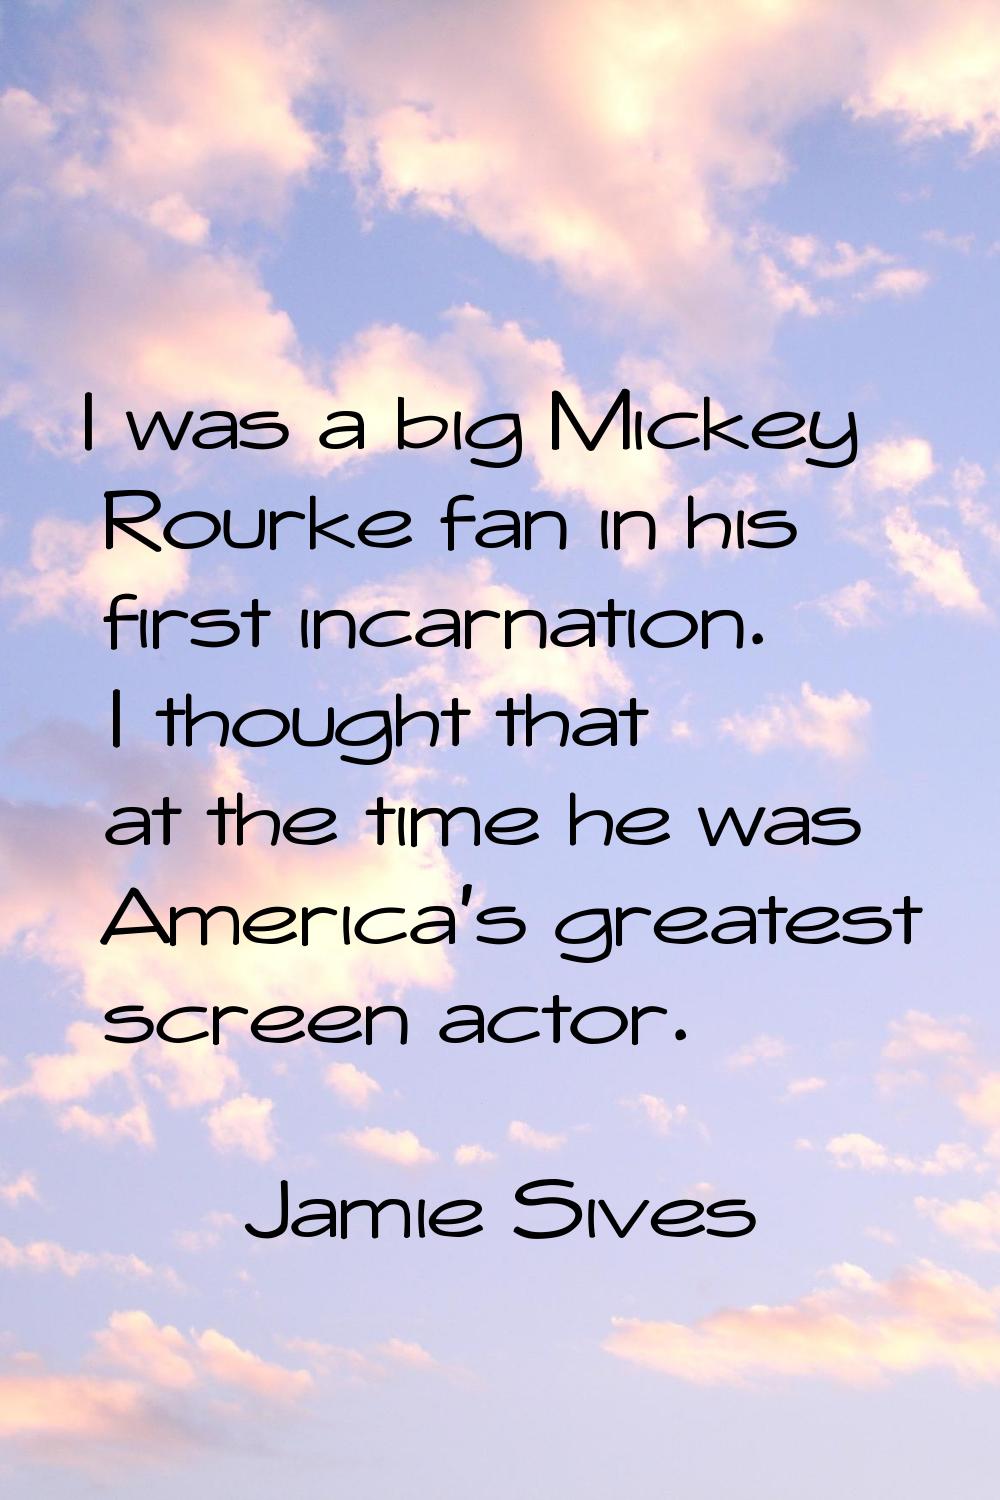 I was a big Mickey Rourke fan in his first incarnation. I thought that at the time he was America's